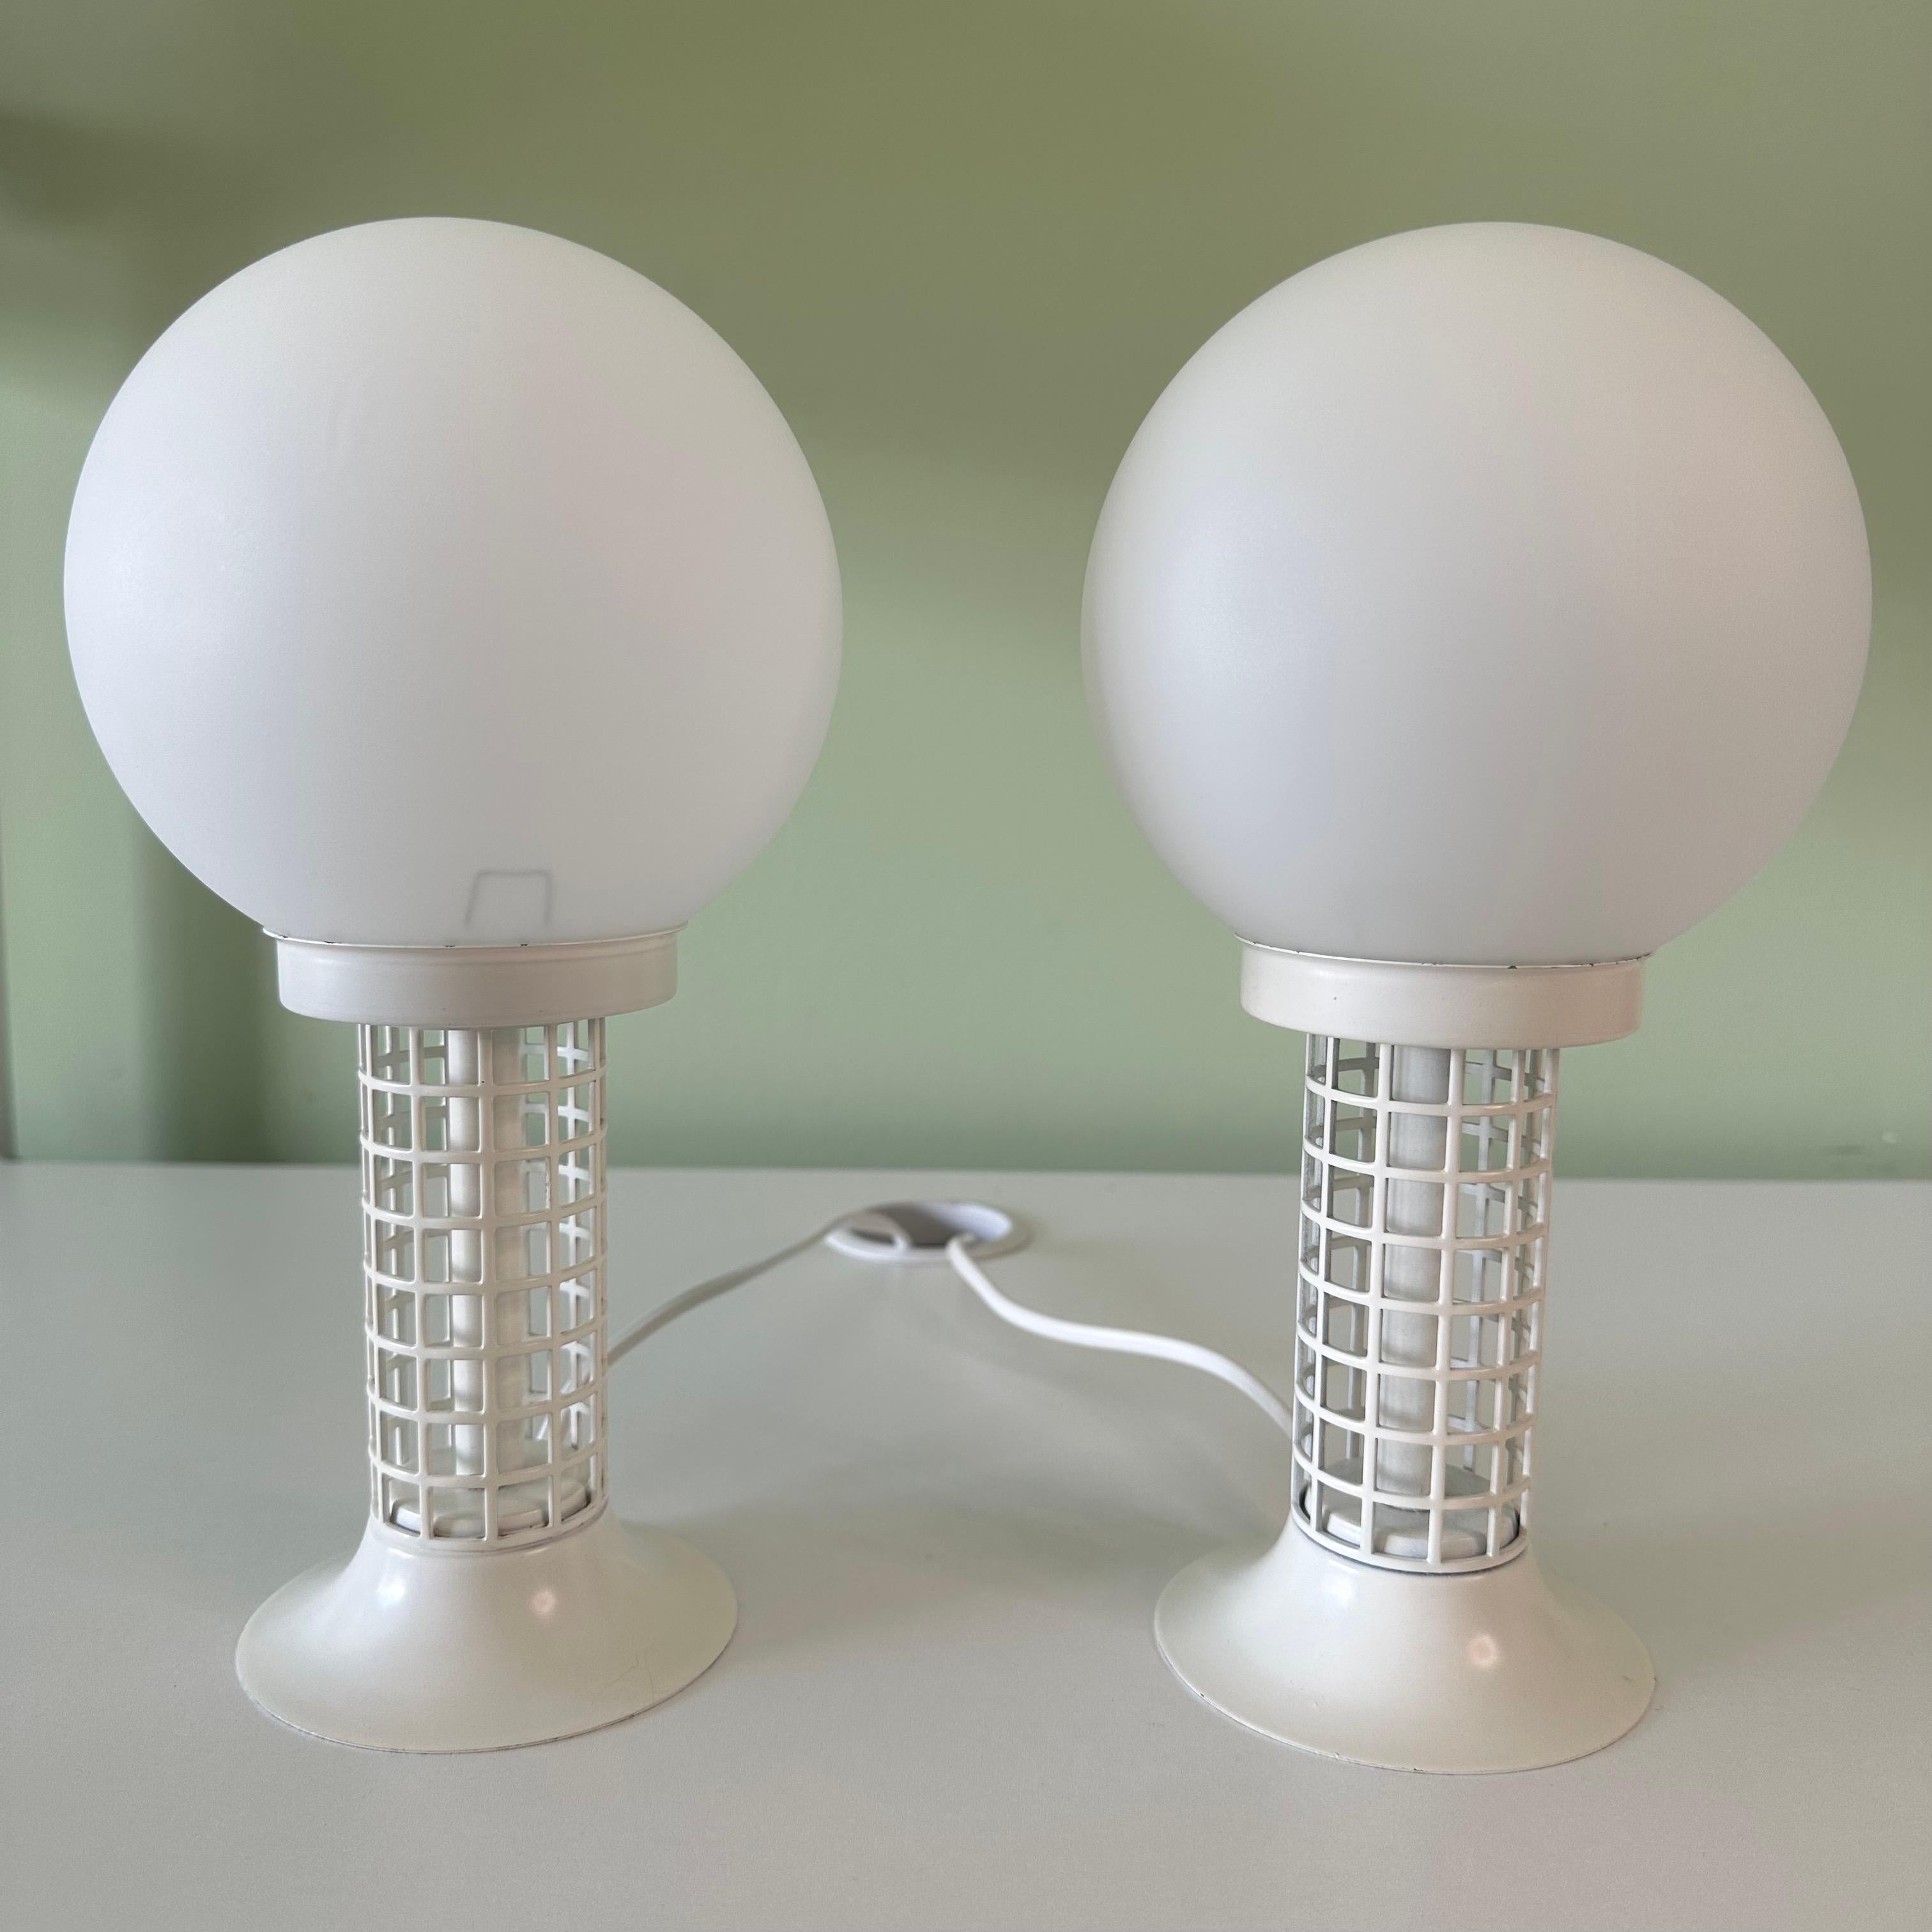 Late 20th Century Pair of Vintage White Modernist Globe Table Lamps For Sale